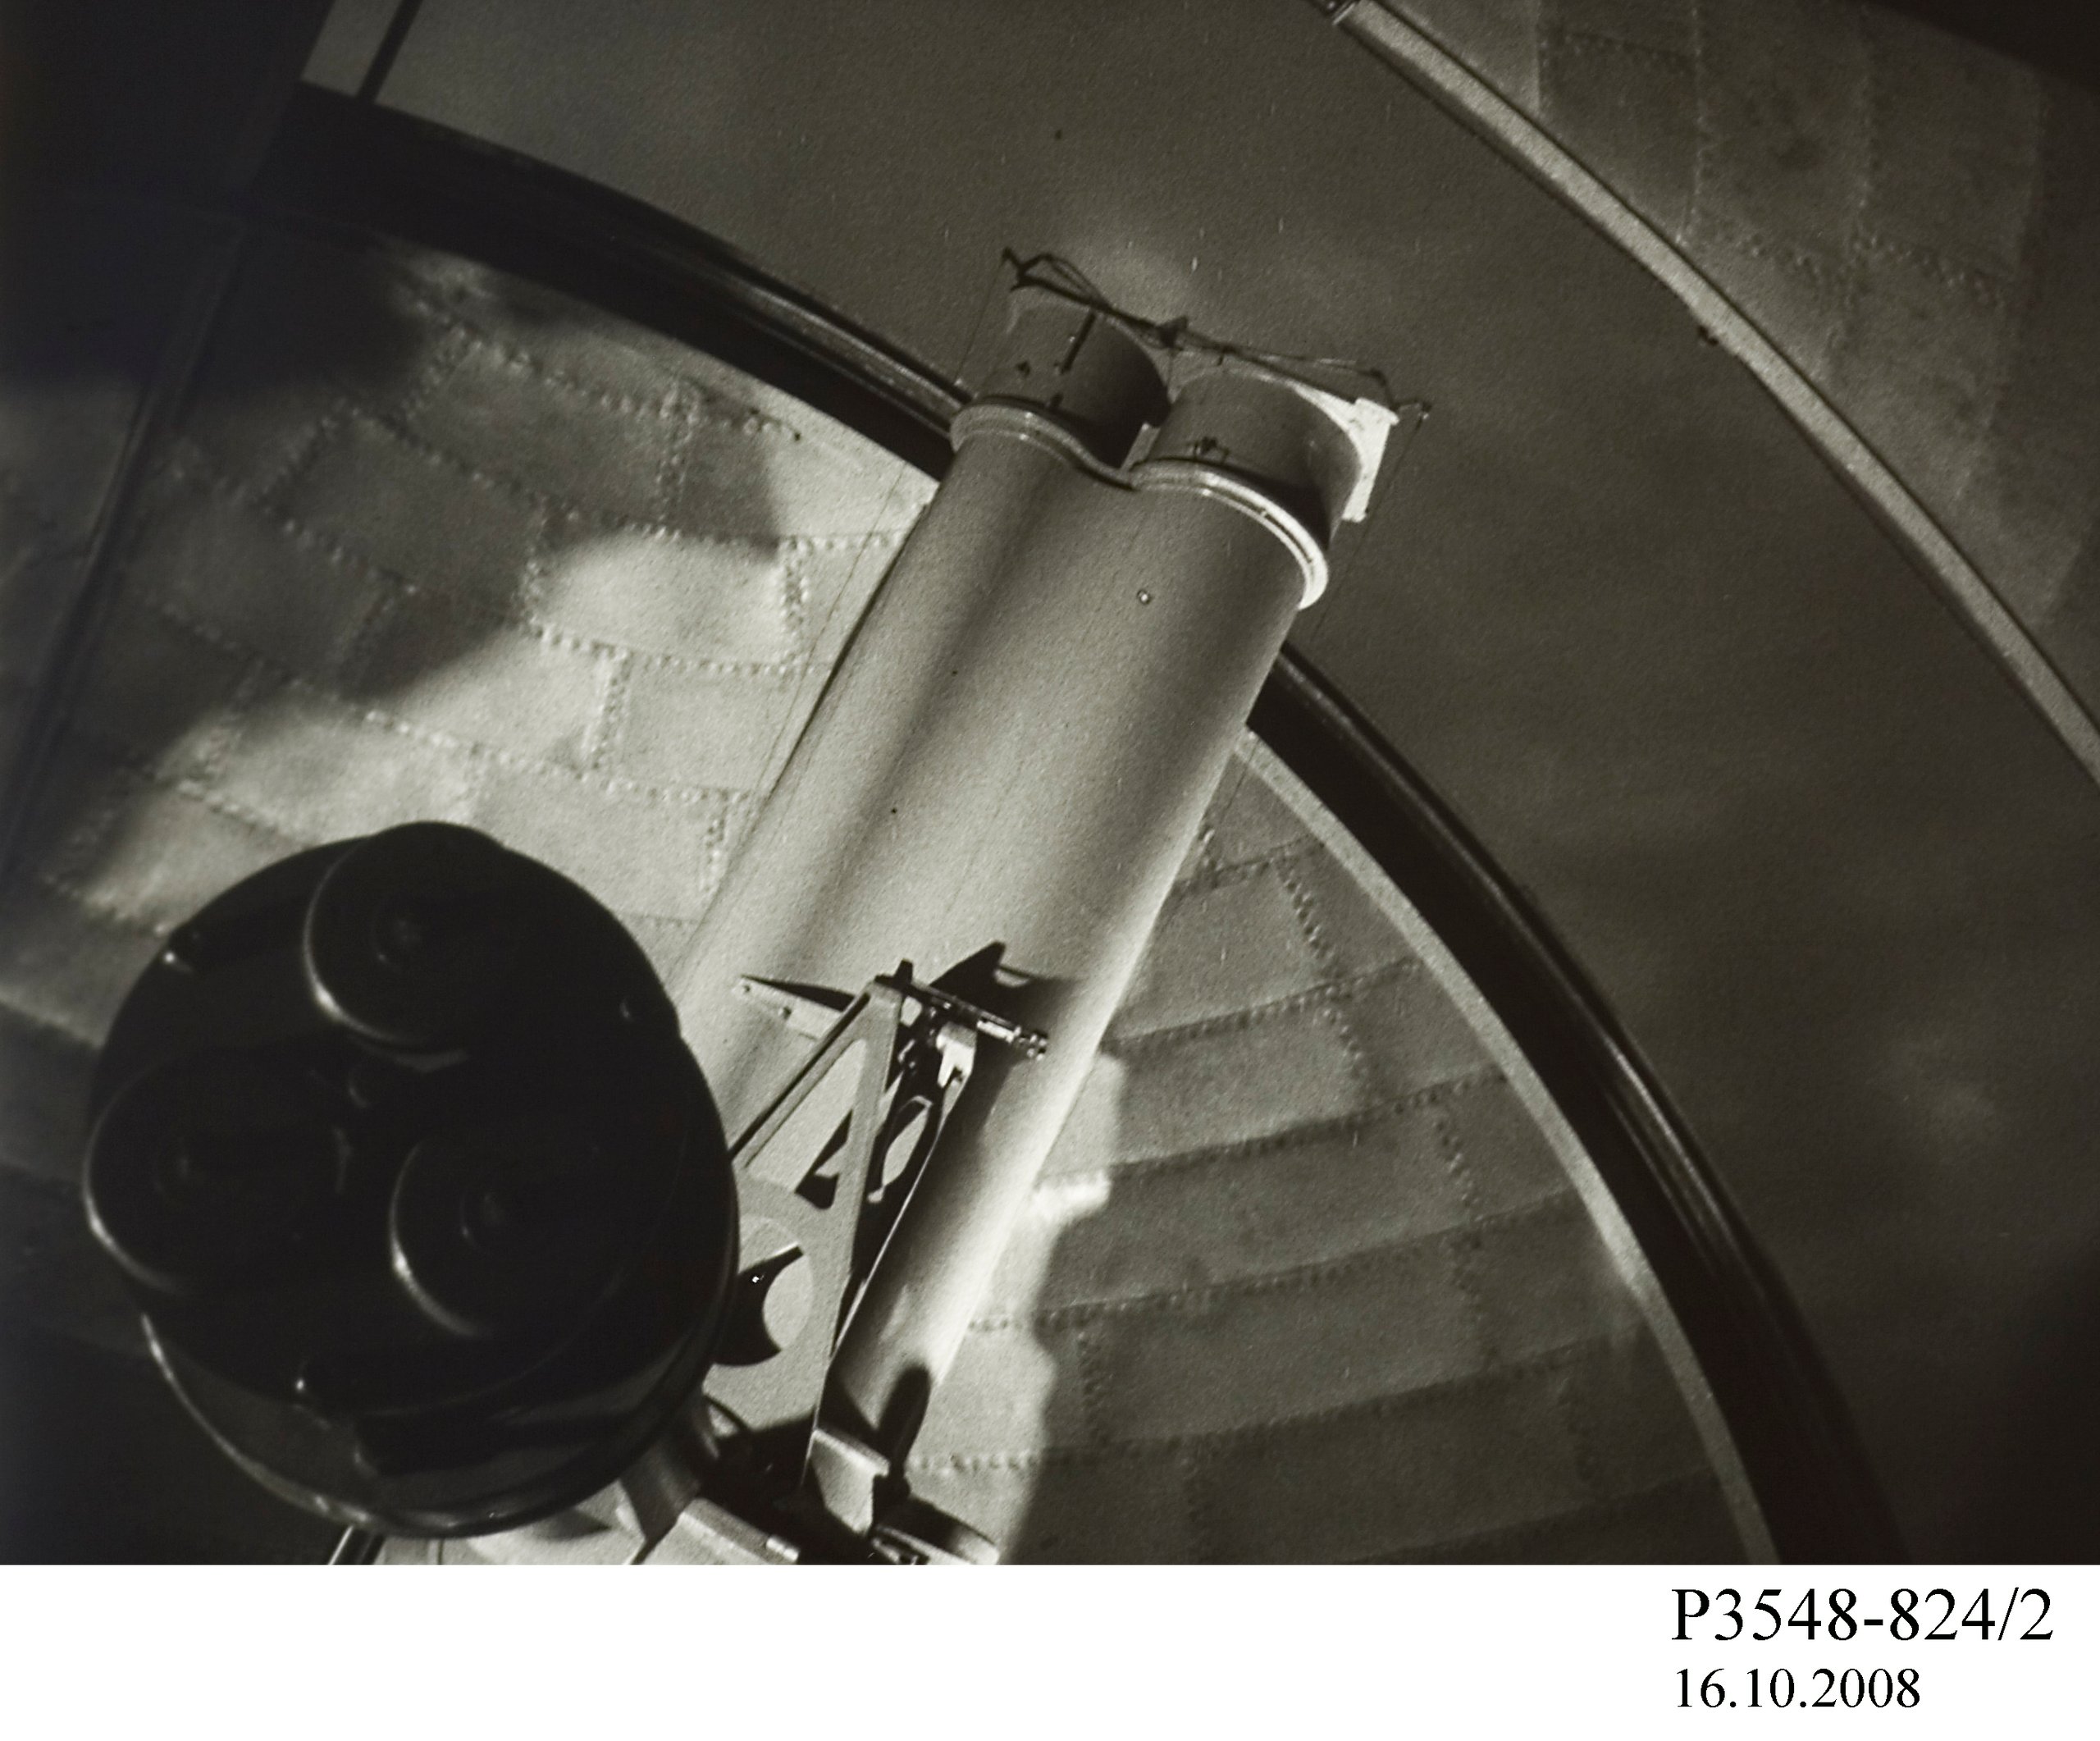 Film strip showing a telescope in an observation dome